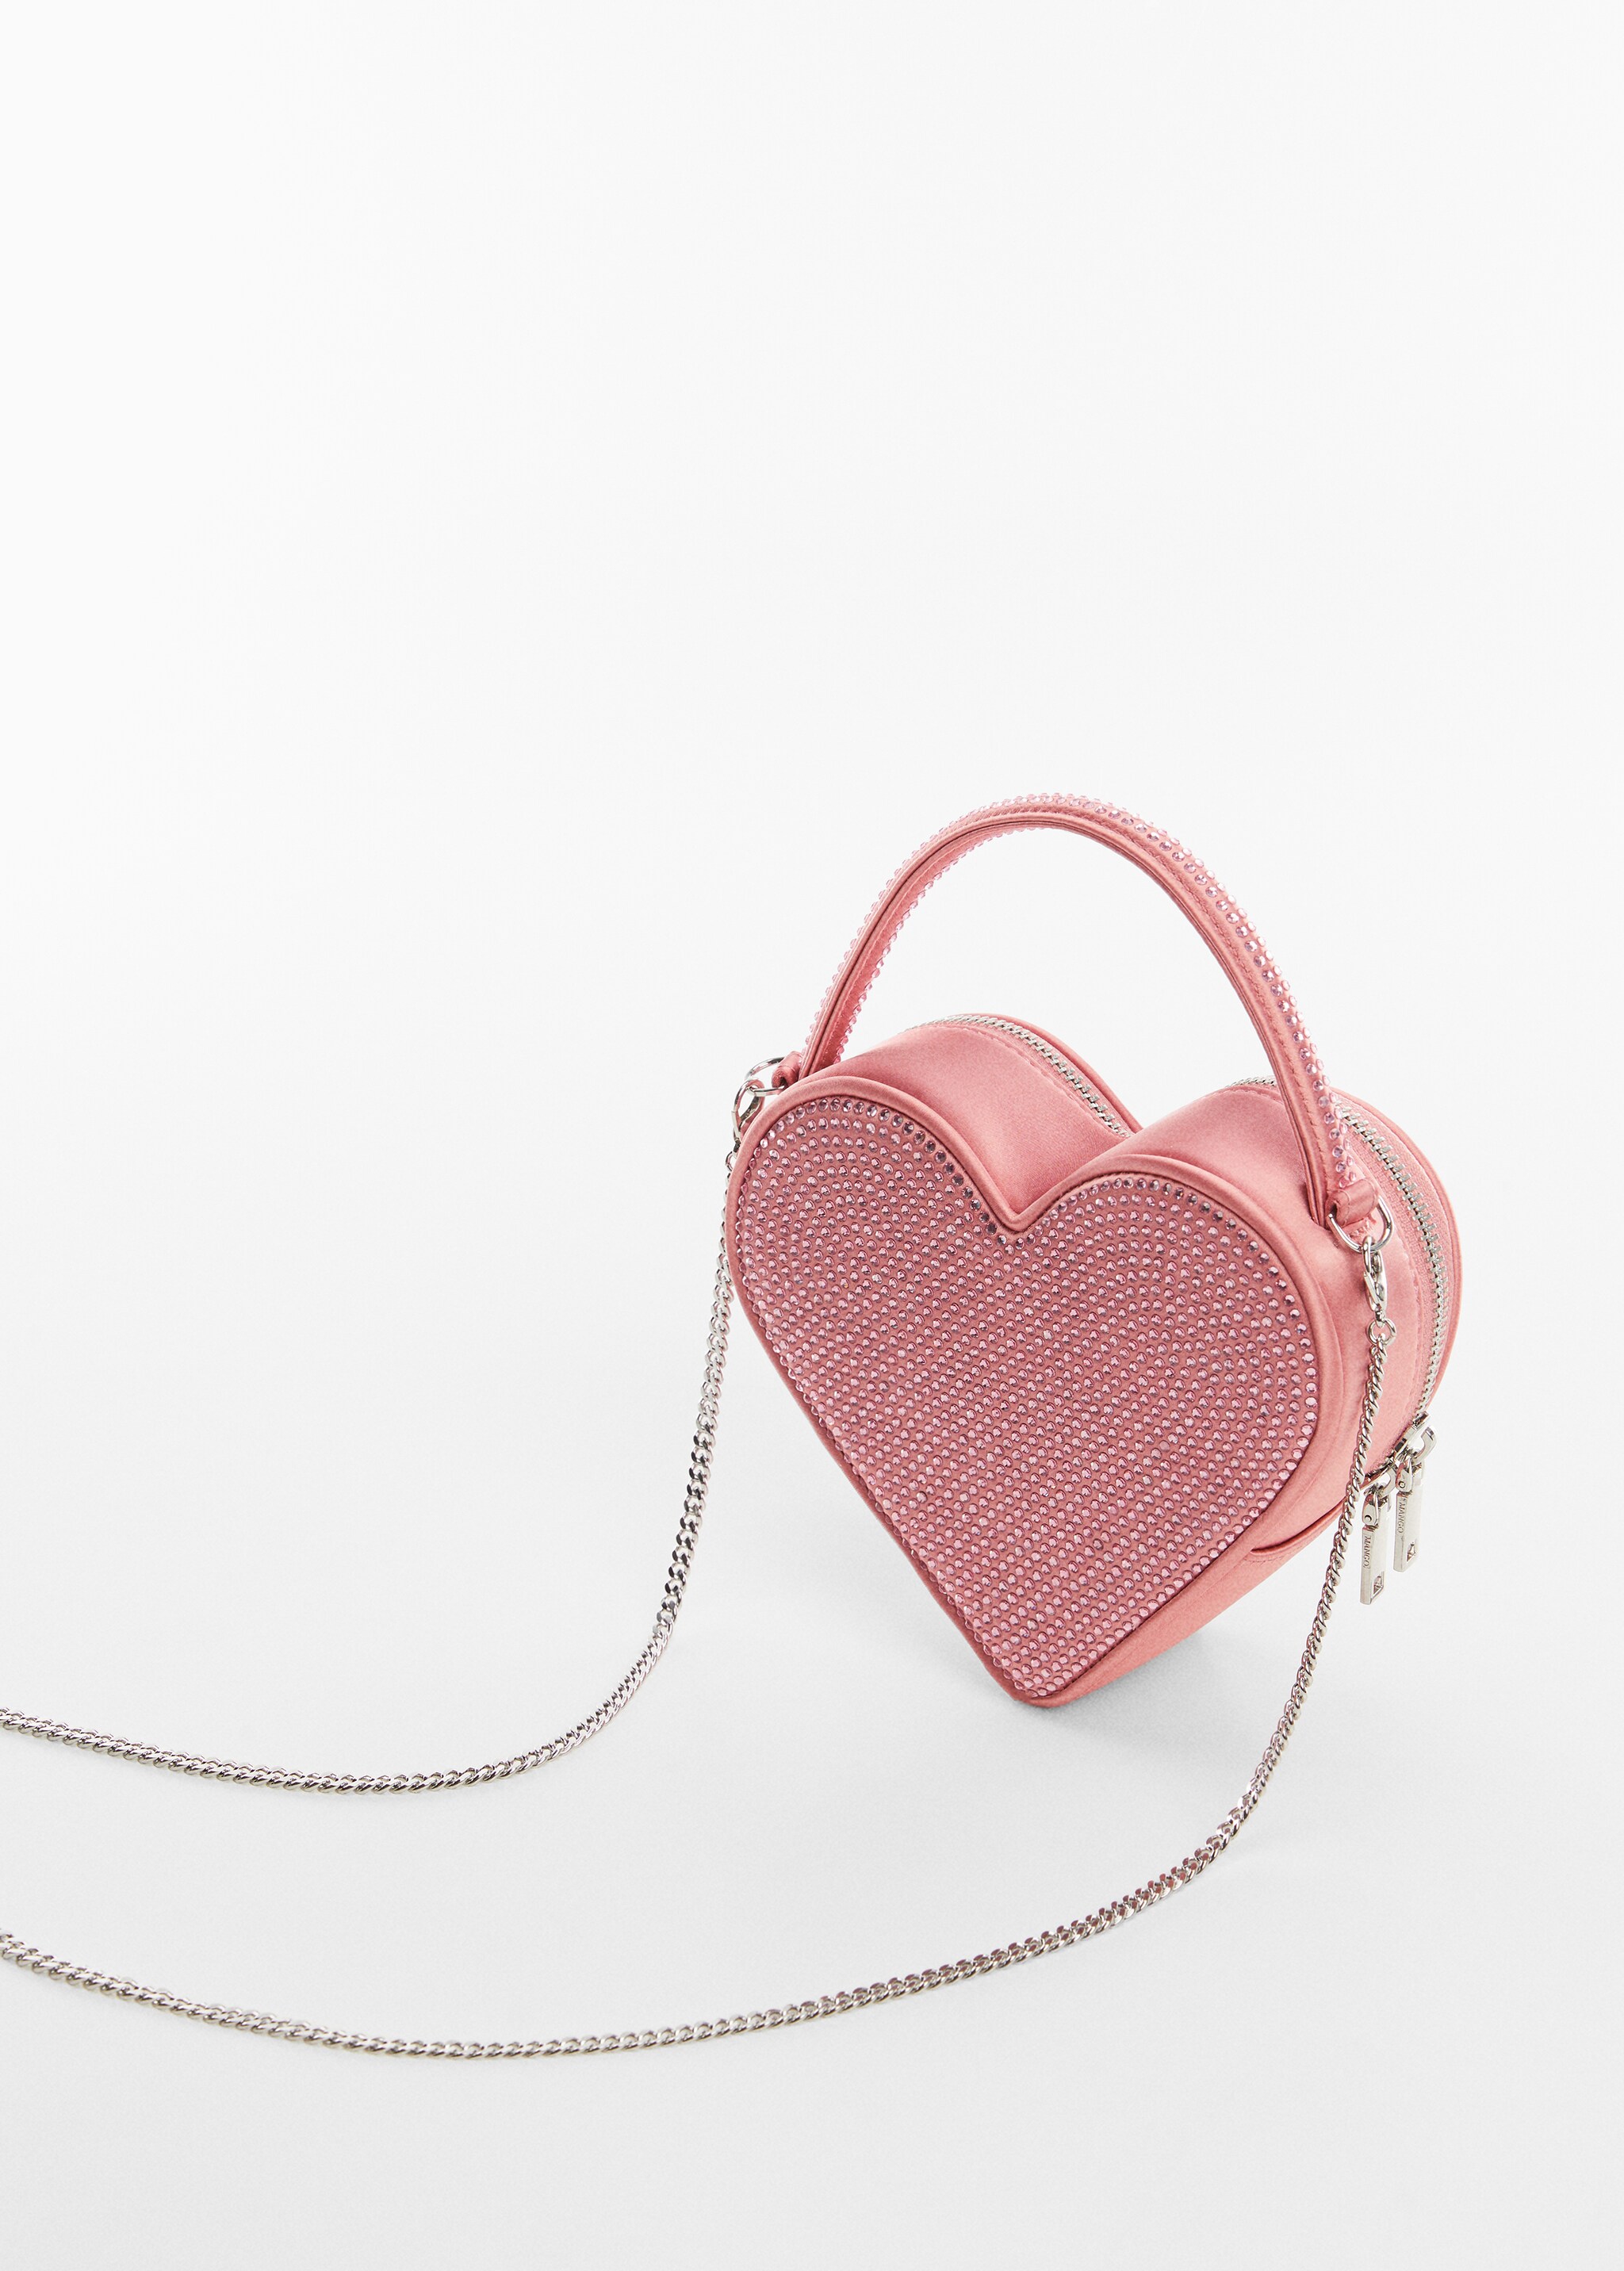 Crystal heart bag - Details of the article 2